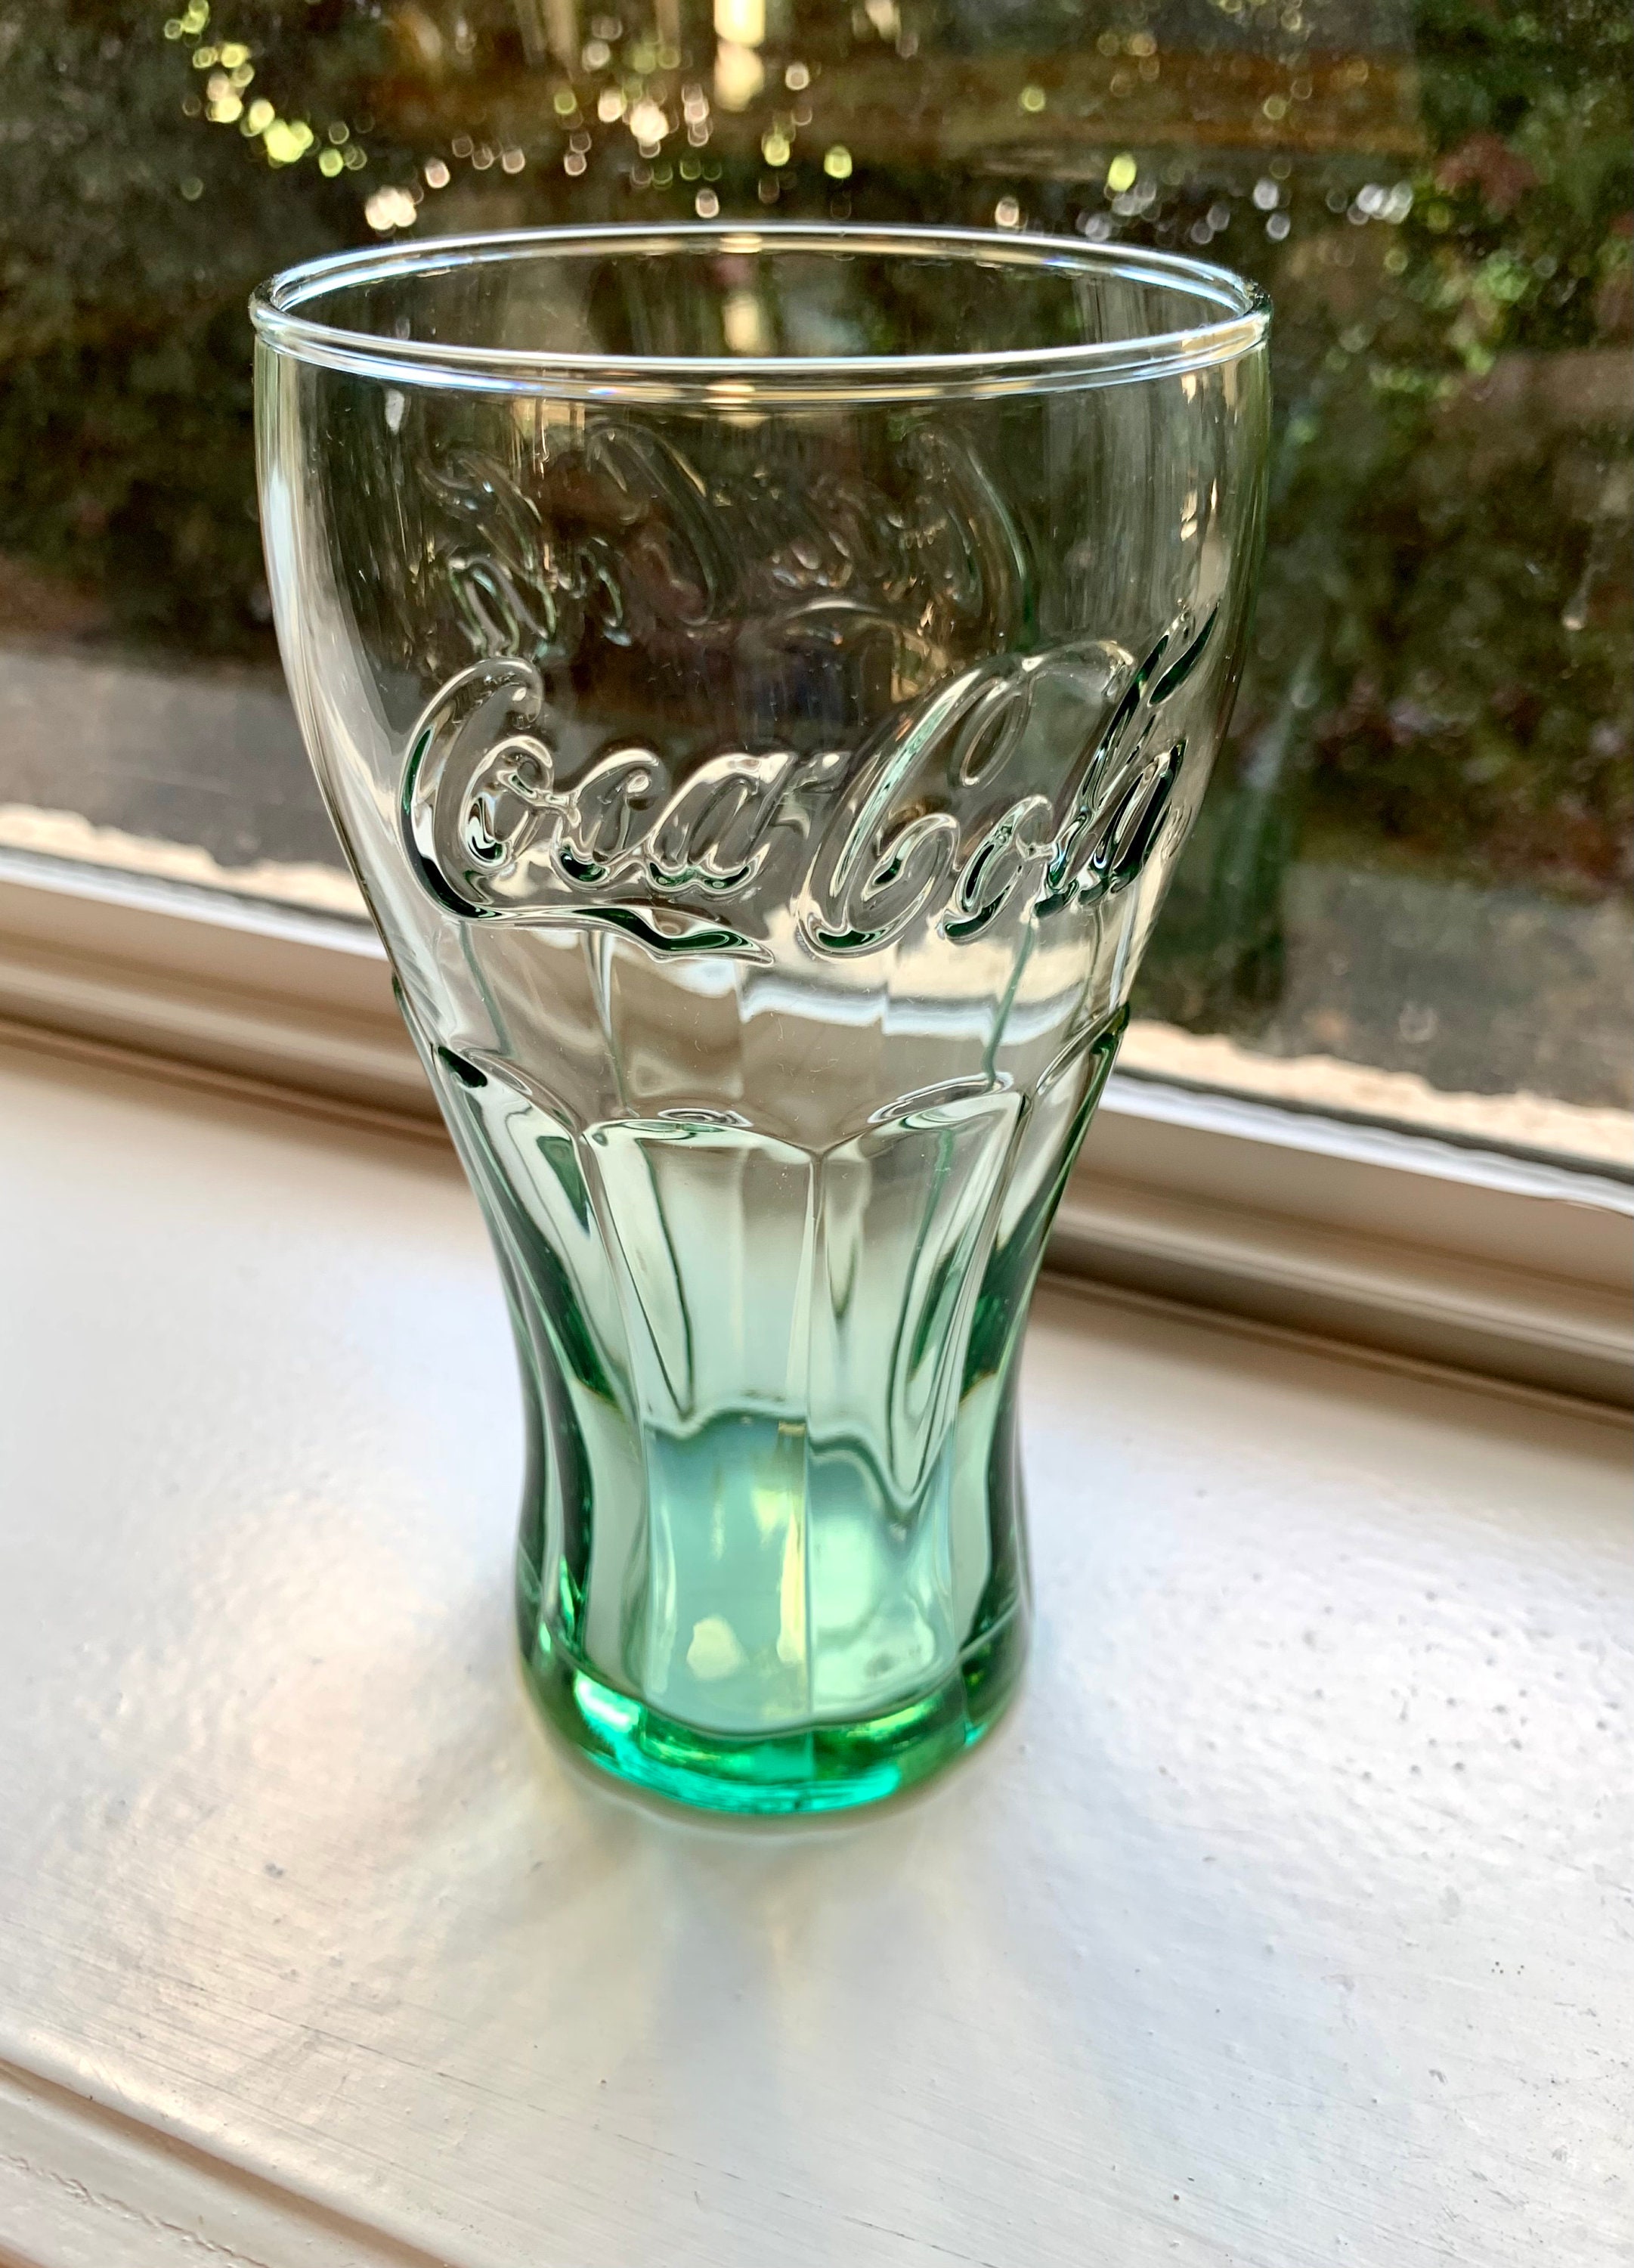 3 Coca-Cola Vintage Tint Drinking Glasses 16 oz. Made In U.S.A. Green Blue  Clear